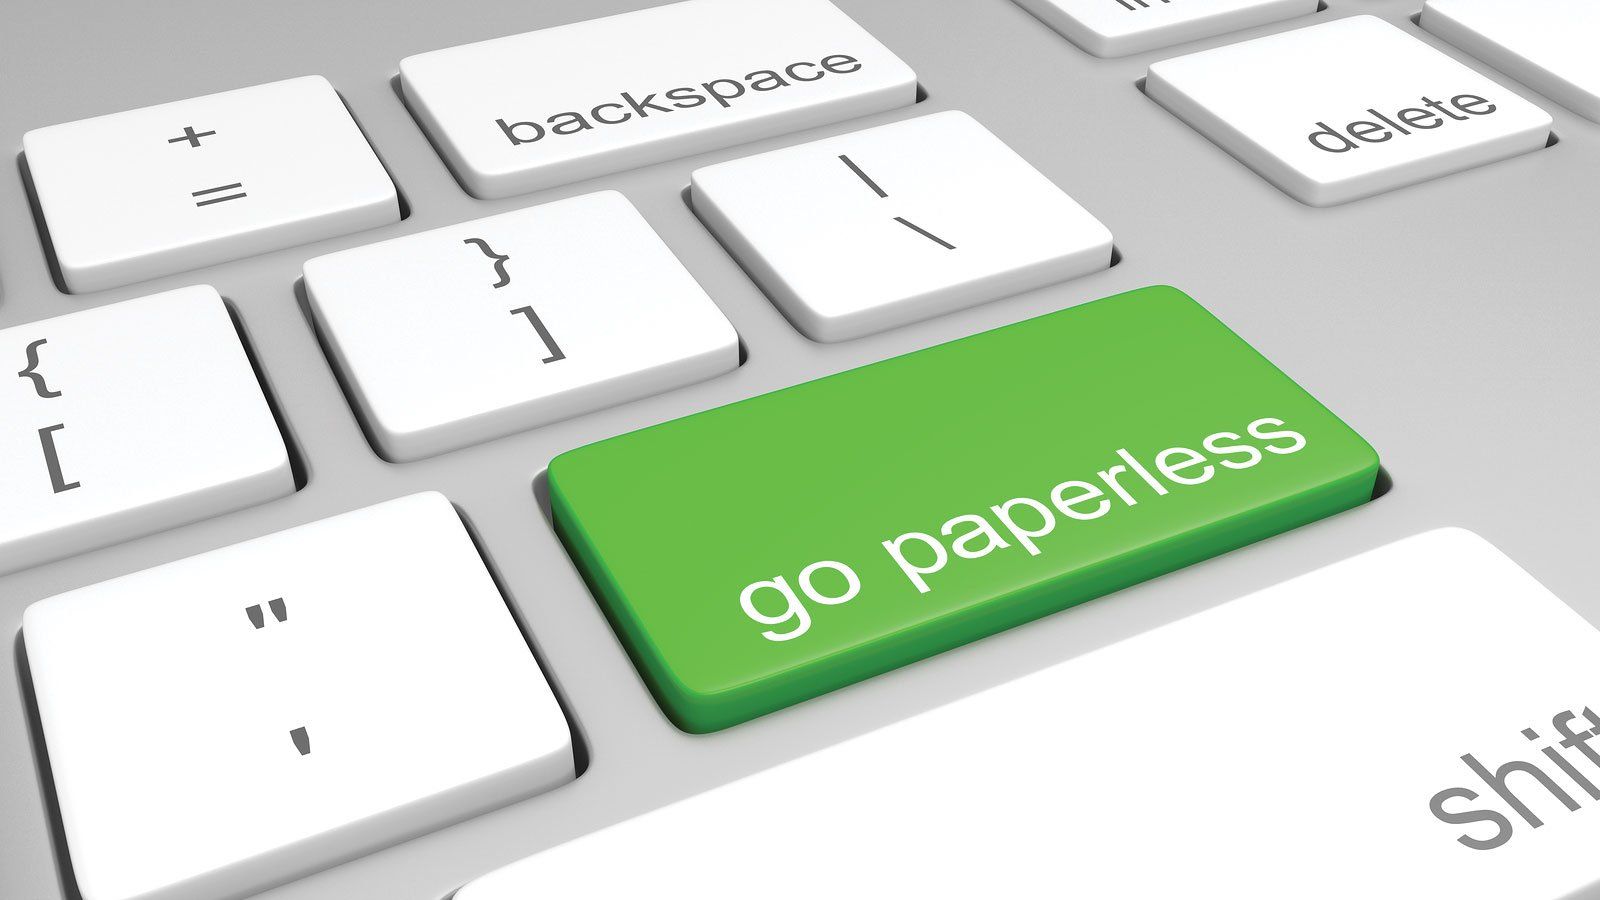 Go paperless green discount image